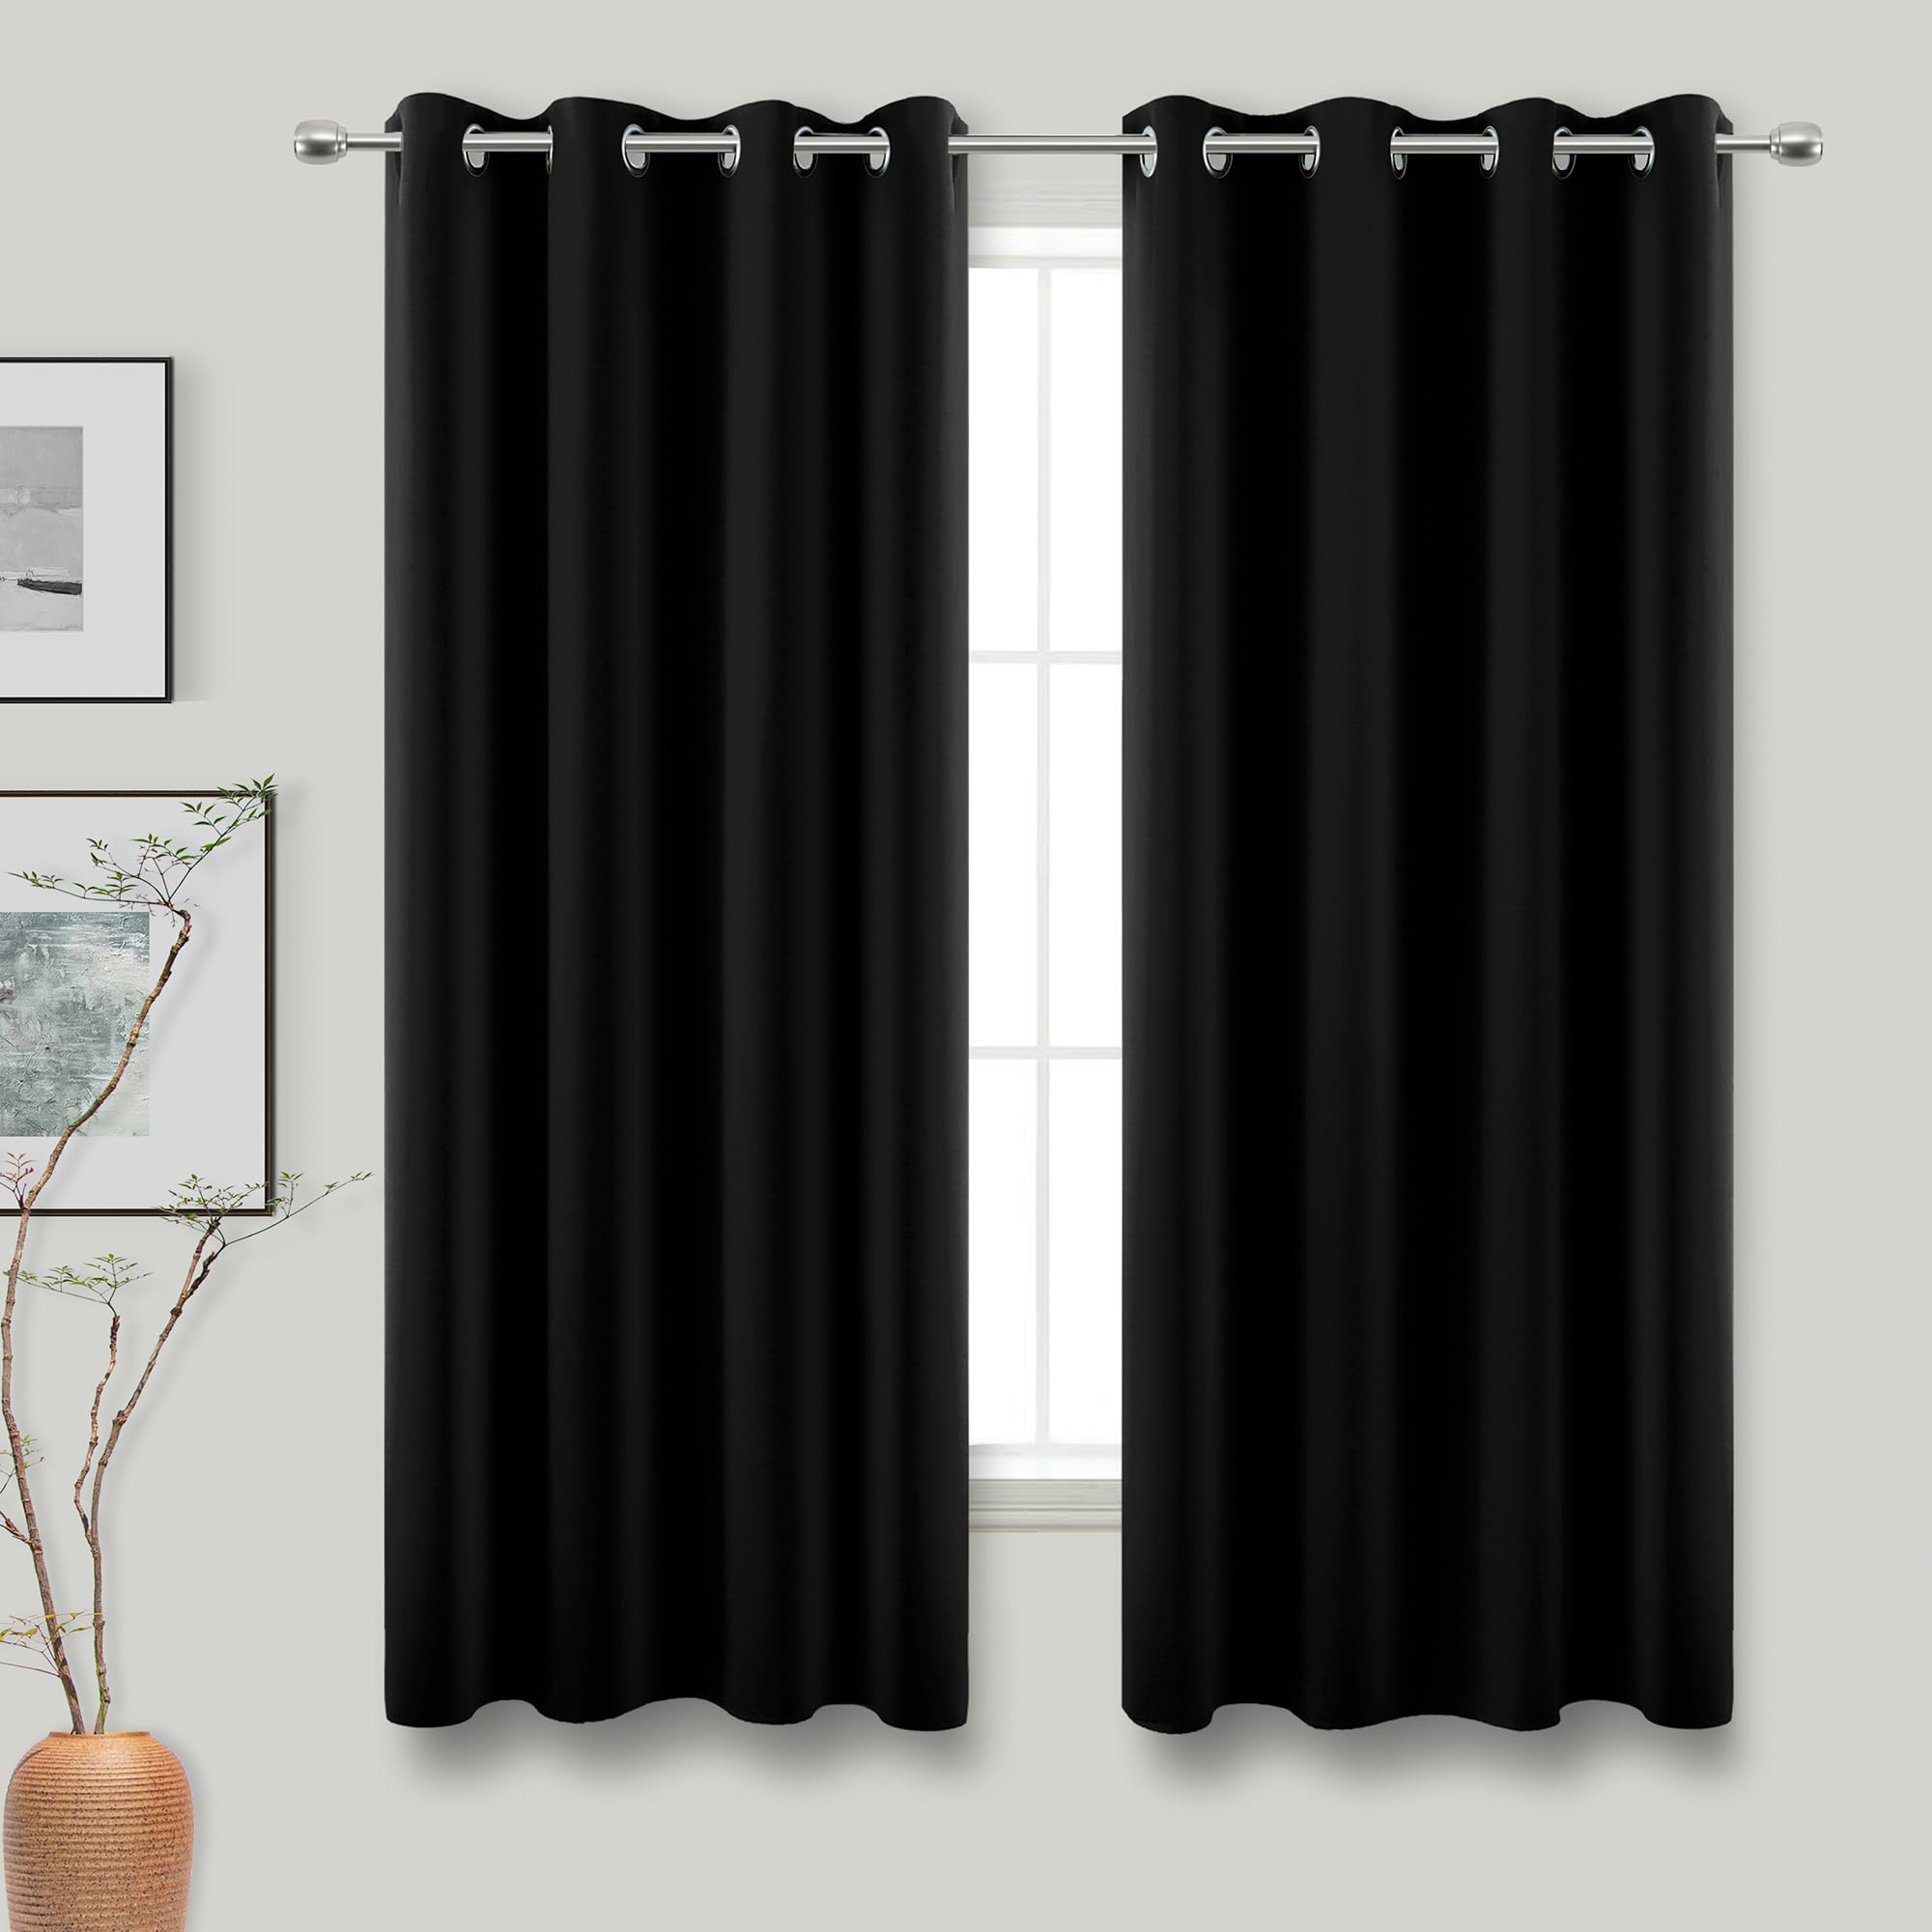 KOUFALL Black Blackout Curtains 63 Inch Length for Bedroom,Thermal Insulated Winter Thick Grommet 2 Panels Ring Blocking Light Dimming P